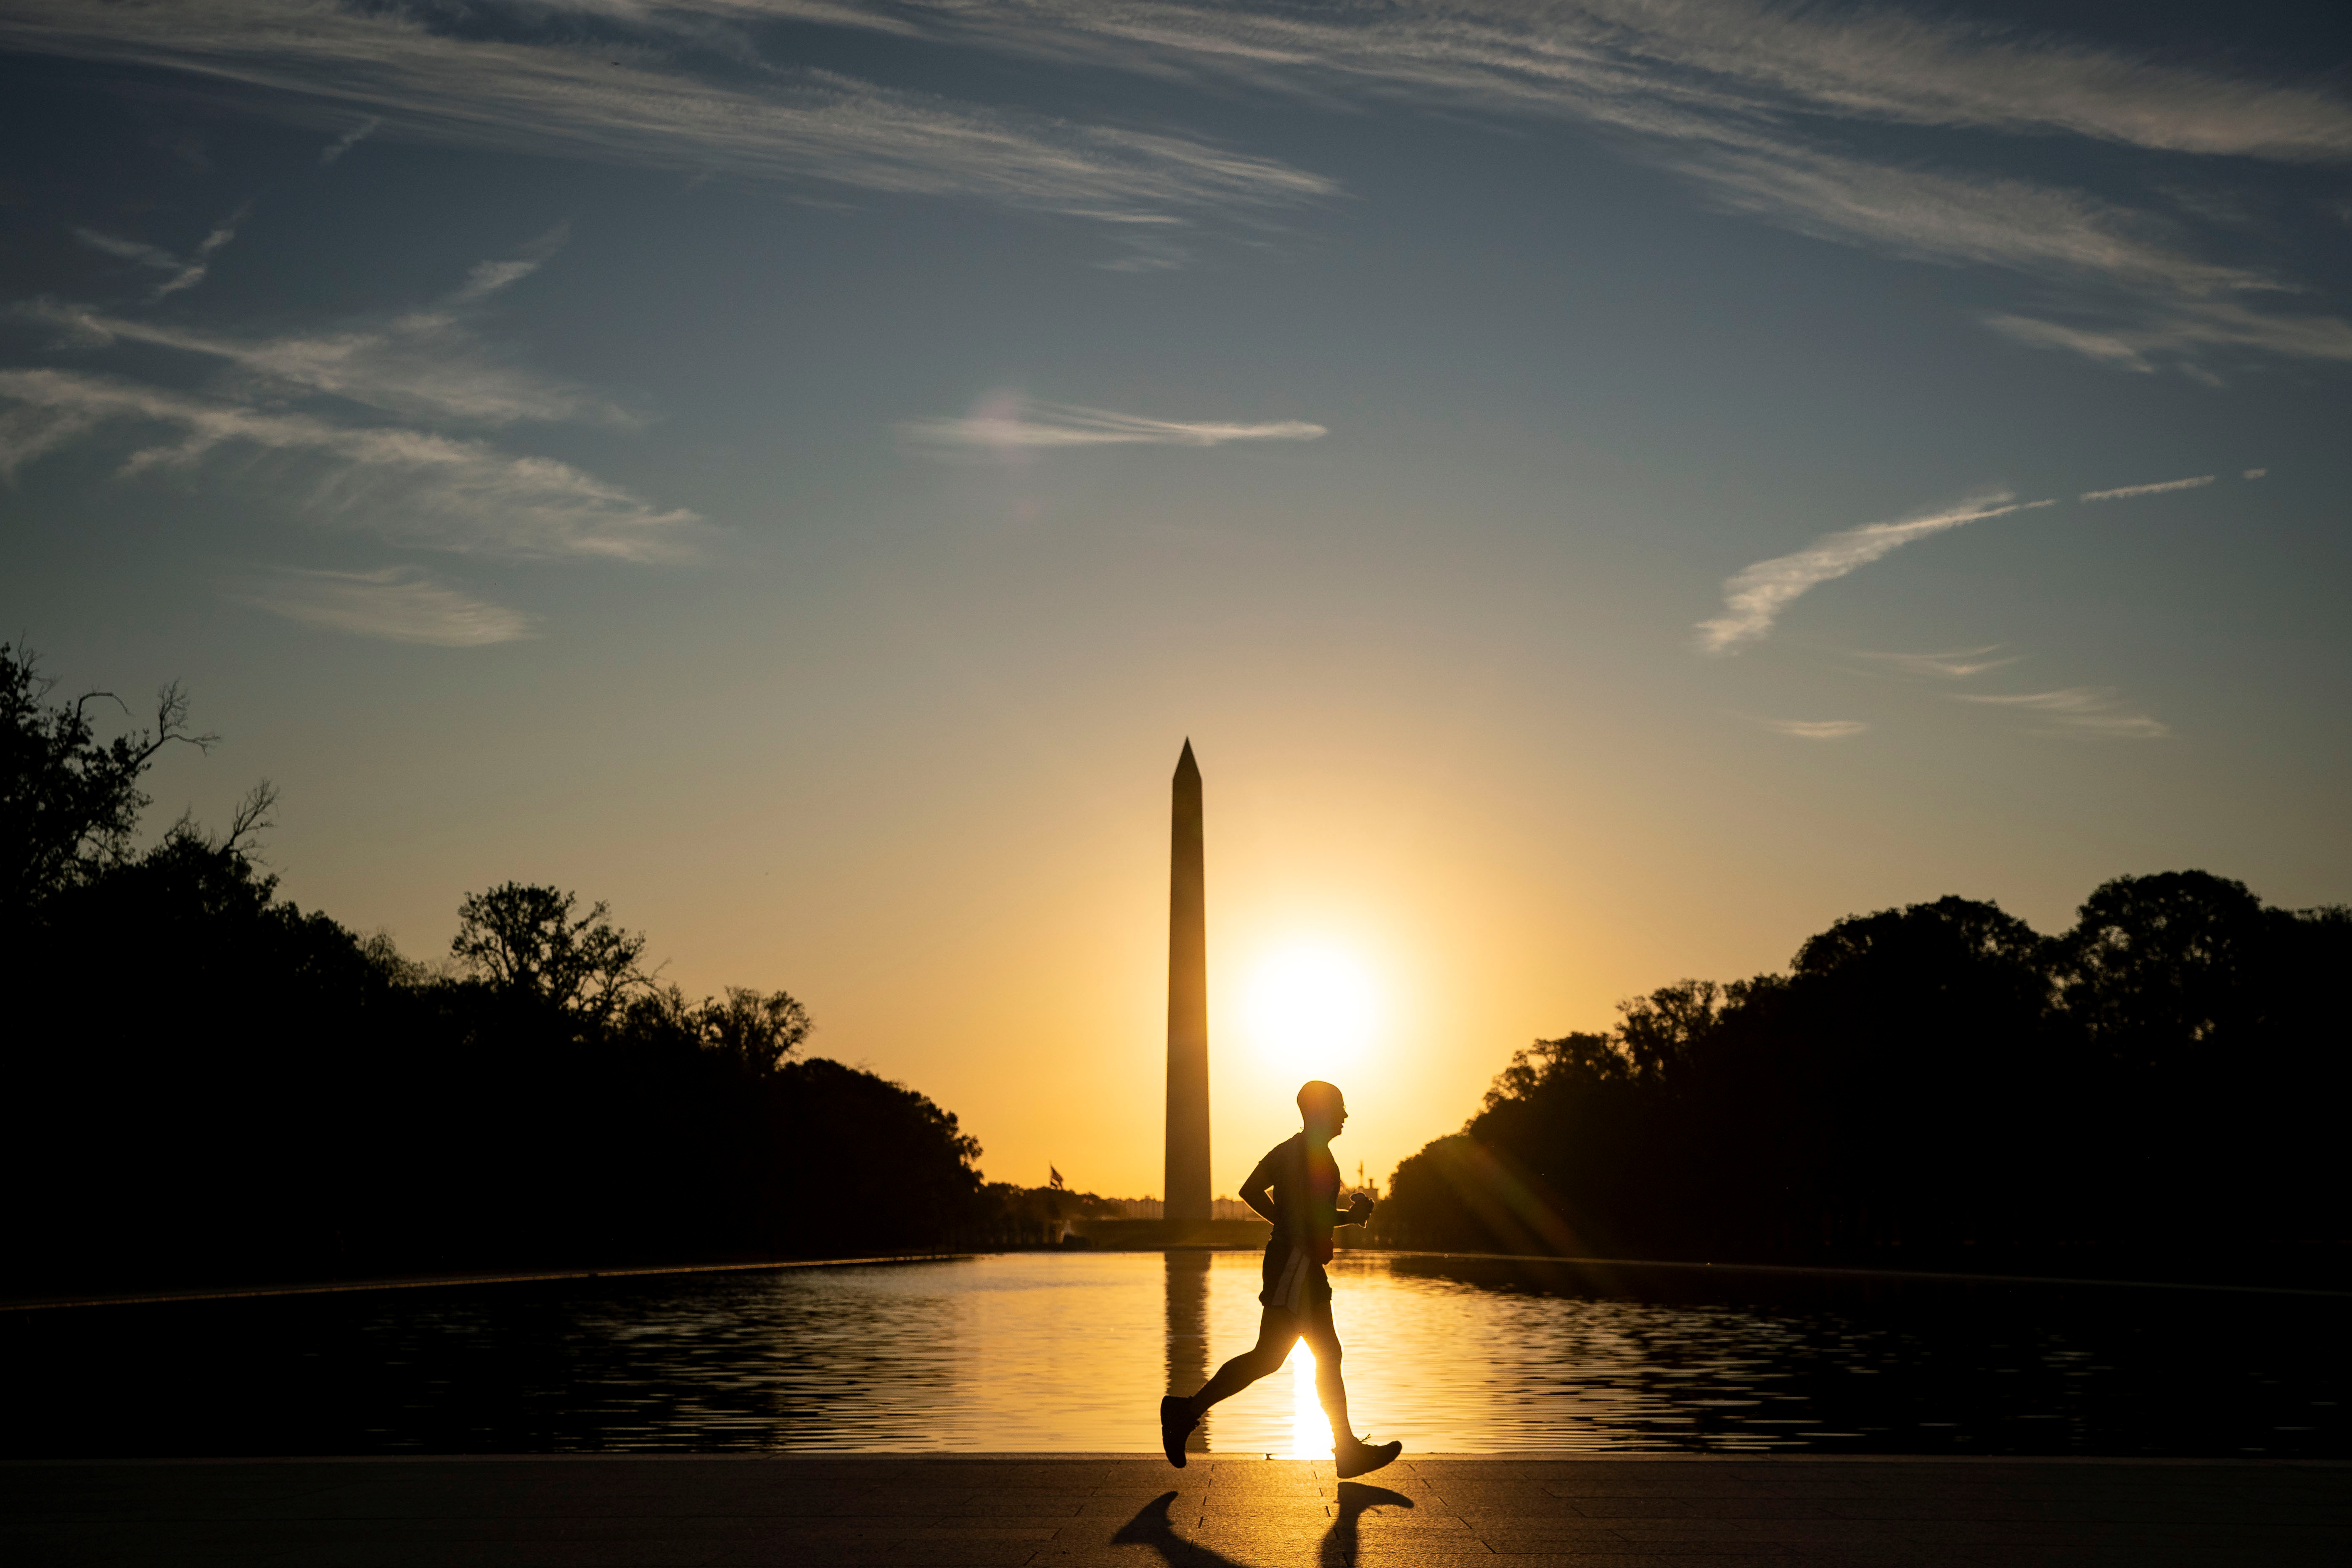 A man runs near the reflecting pool between the Lincoln Memorial and the Washington Monument at sunrise on the National Mall in Washington